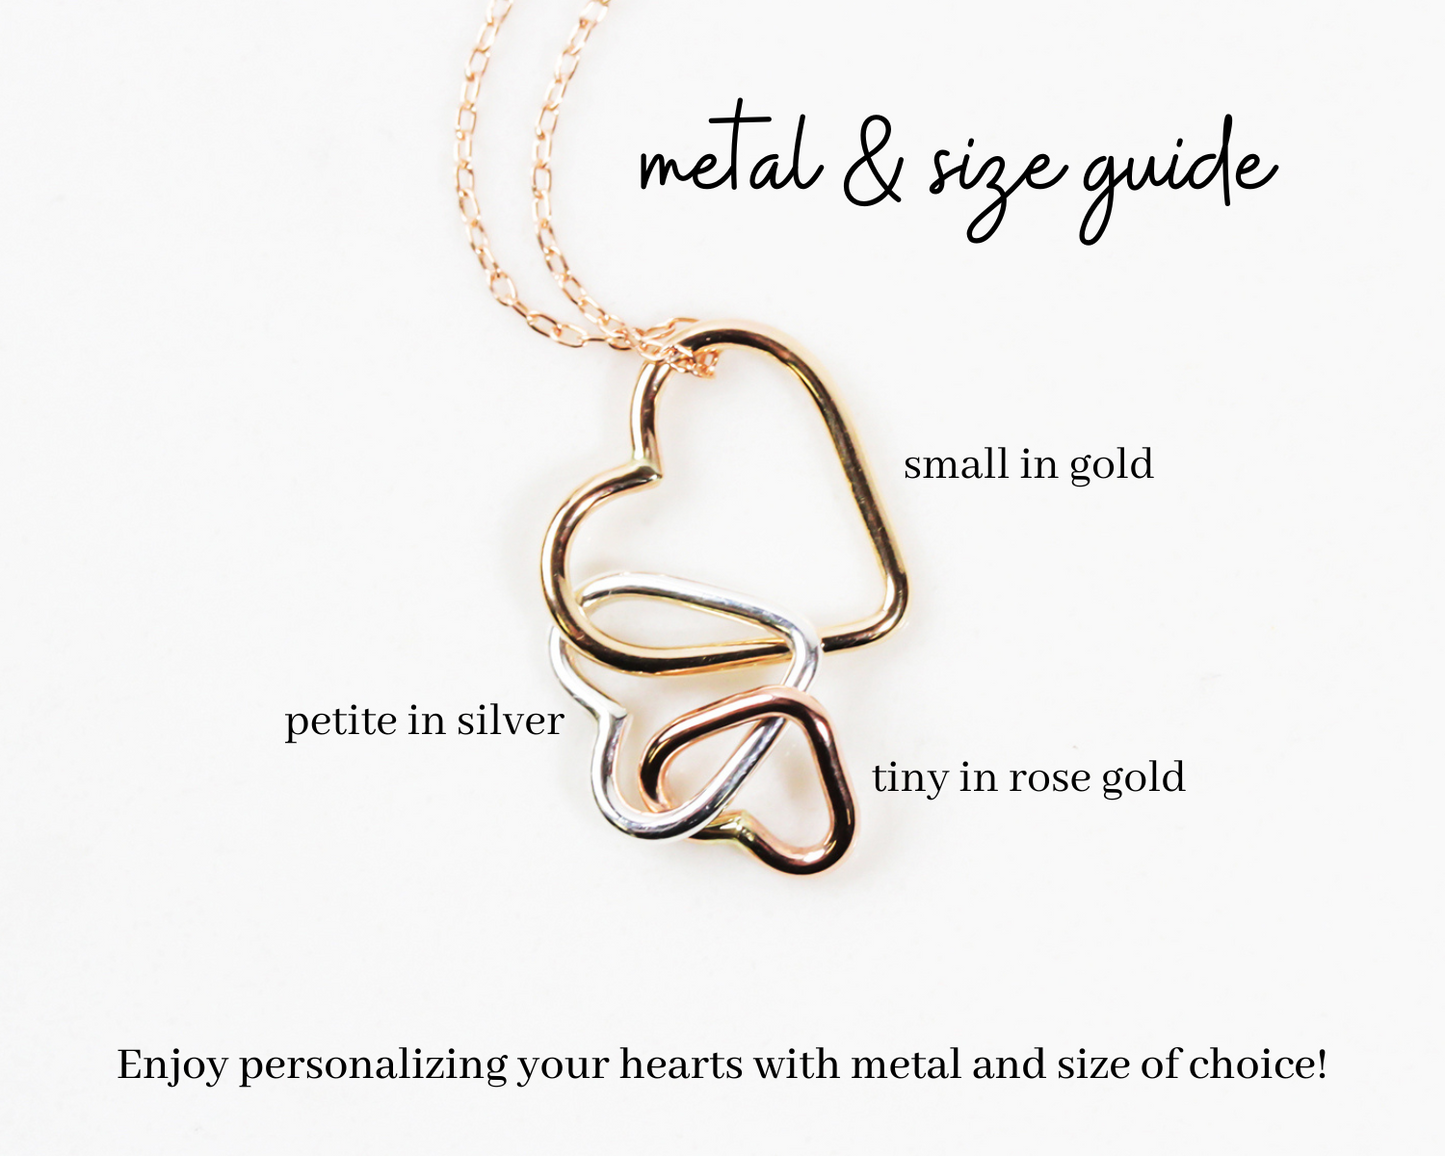 Image shows a guide to help with selection of metal and size of heart. You can order in 14 karat rose and yellow gold filled and sterling silver in the sizes tiny, petite and small. You select the size and heart metal for a custom piece.